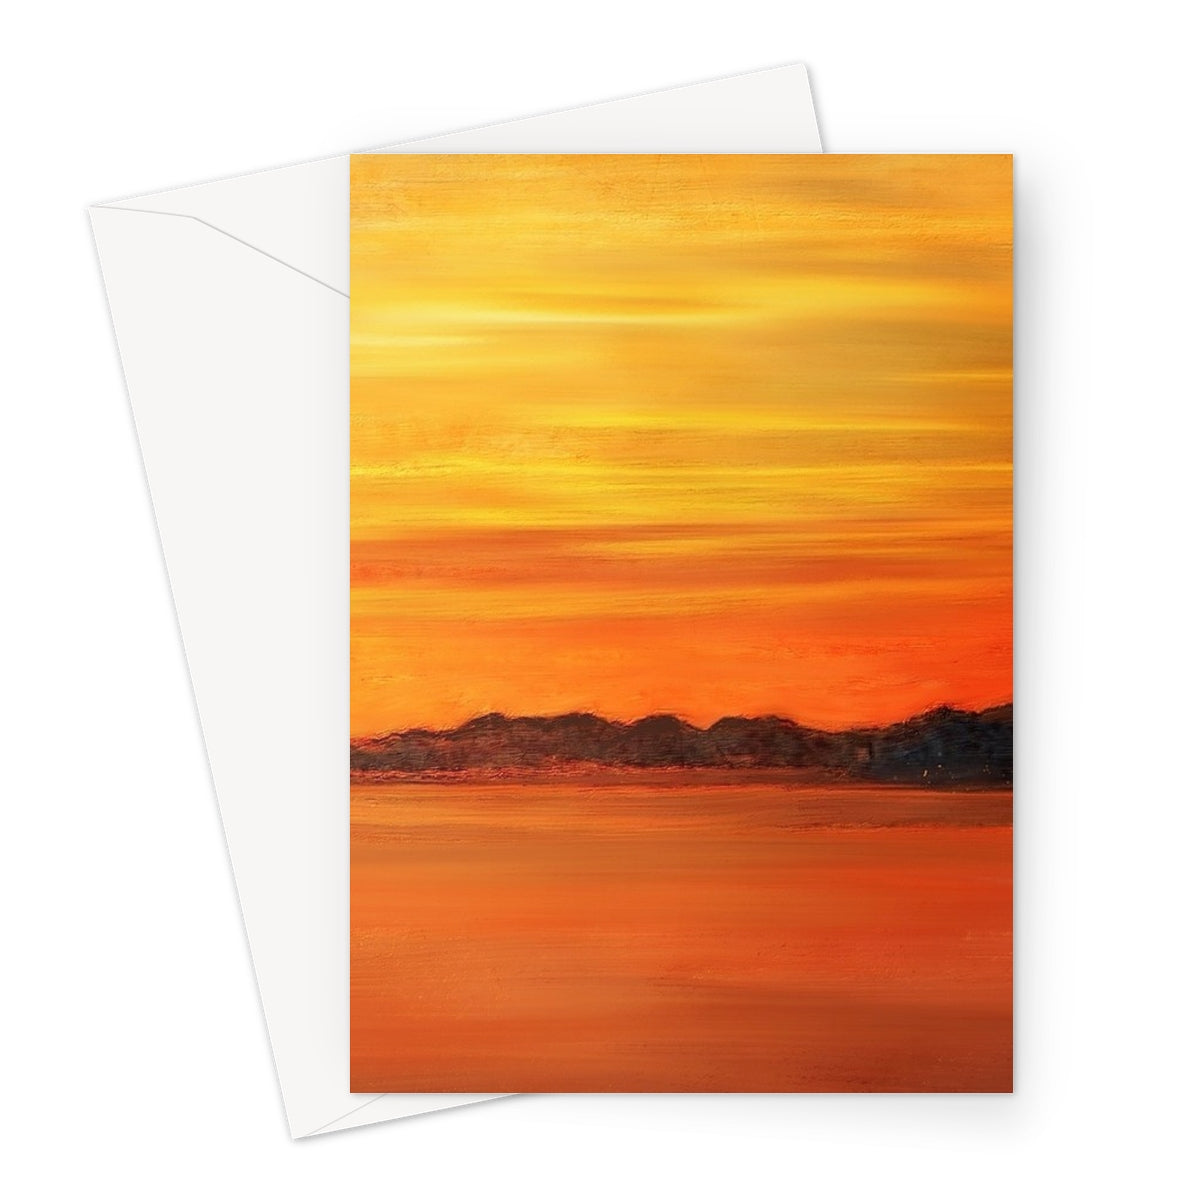 Loch Fyne Sunset Art Gifts Greeting Card-Greetings Cards-Scottish Lochs & Mountains Art Gallery-A5 Portrait-1 Card-Paintings, Prints, Homeware, Art Gifts From Scotland By Scottish Artist Kevin Hunter